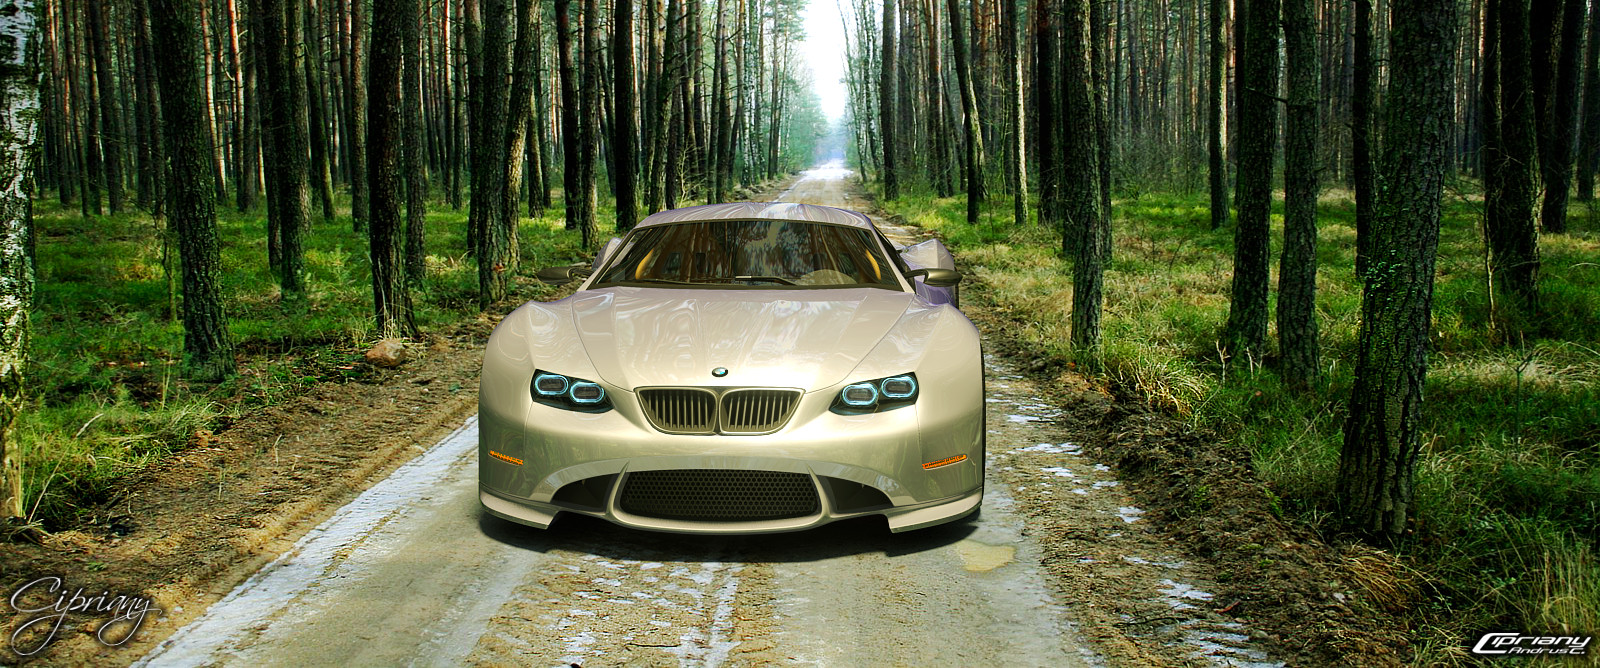 Amazing Bmw Subsido Concept Pictures & Backgrounds